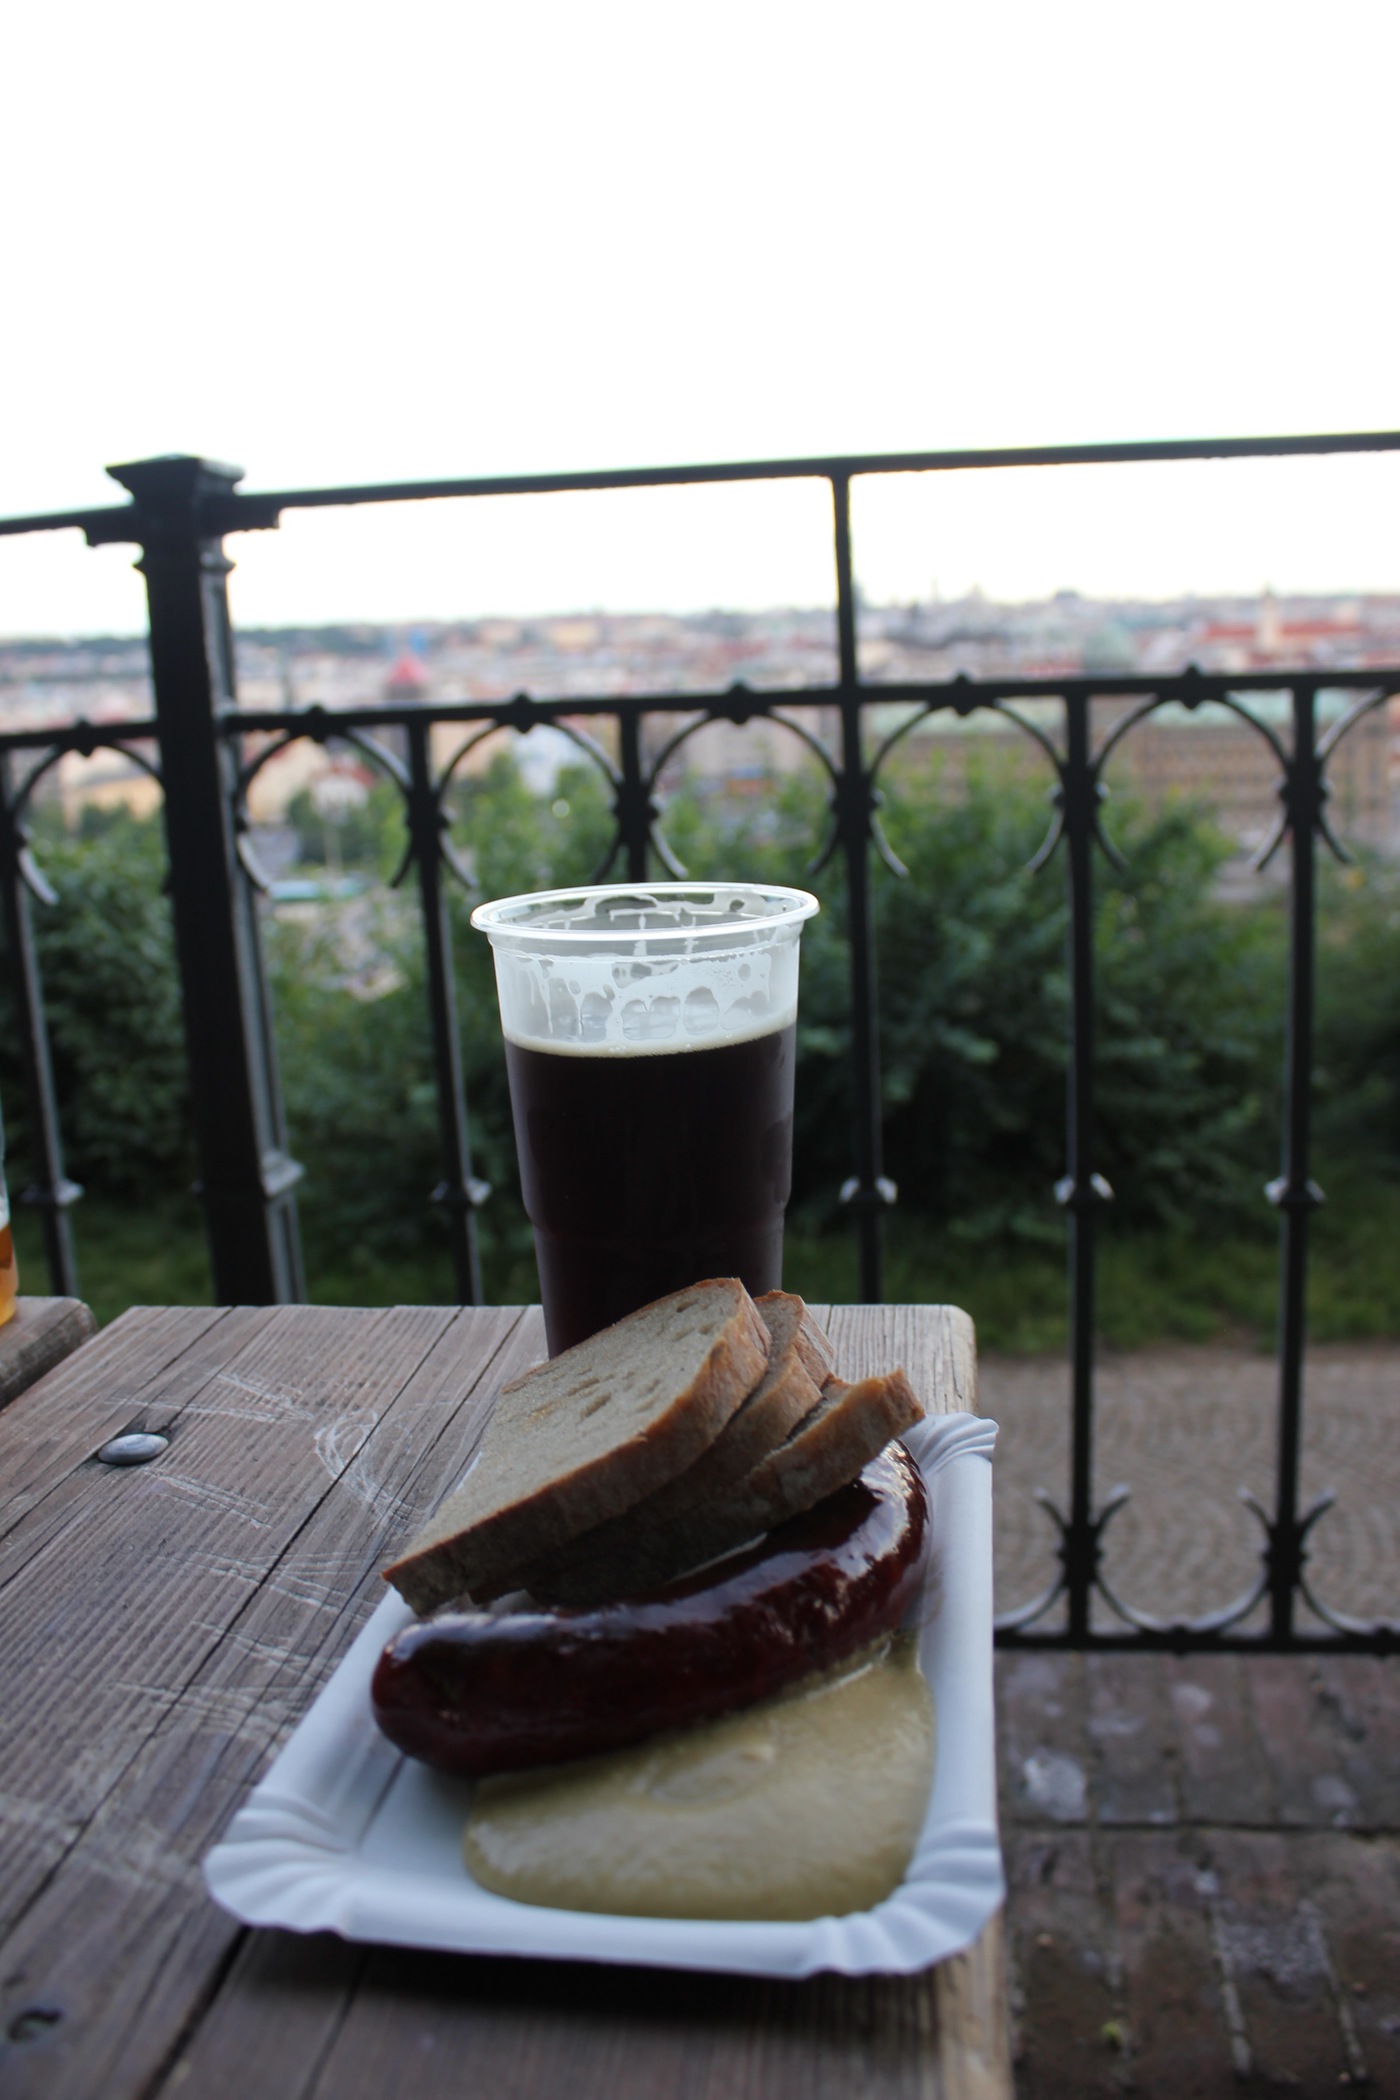 Sausage, rye bread, mustard, and stout at the Letna beer garden in Prague